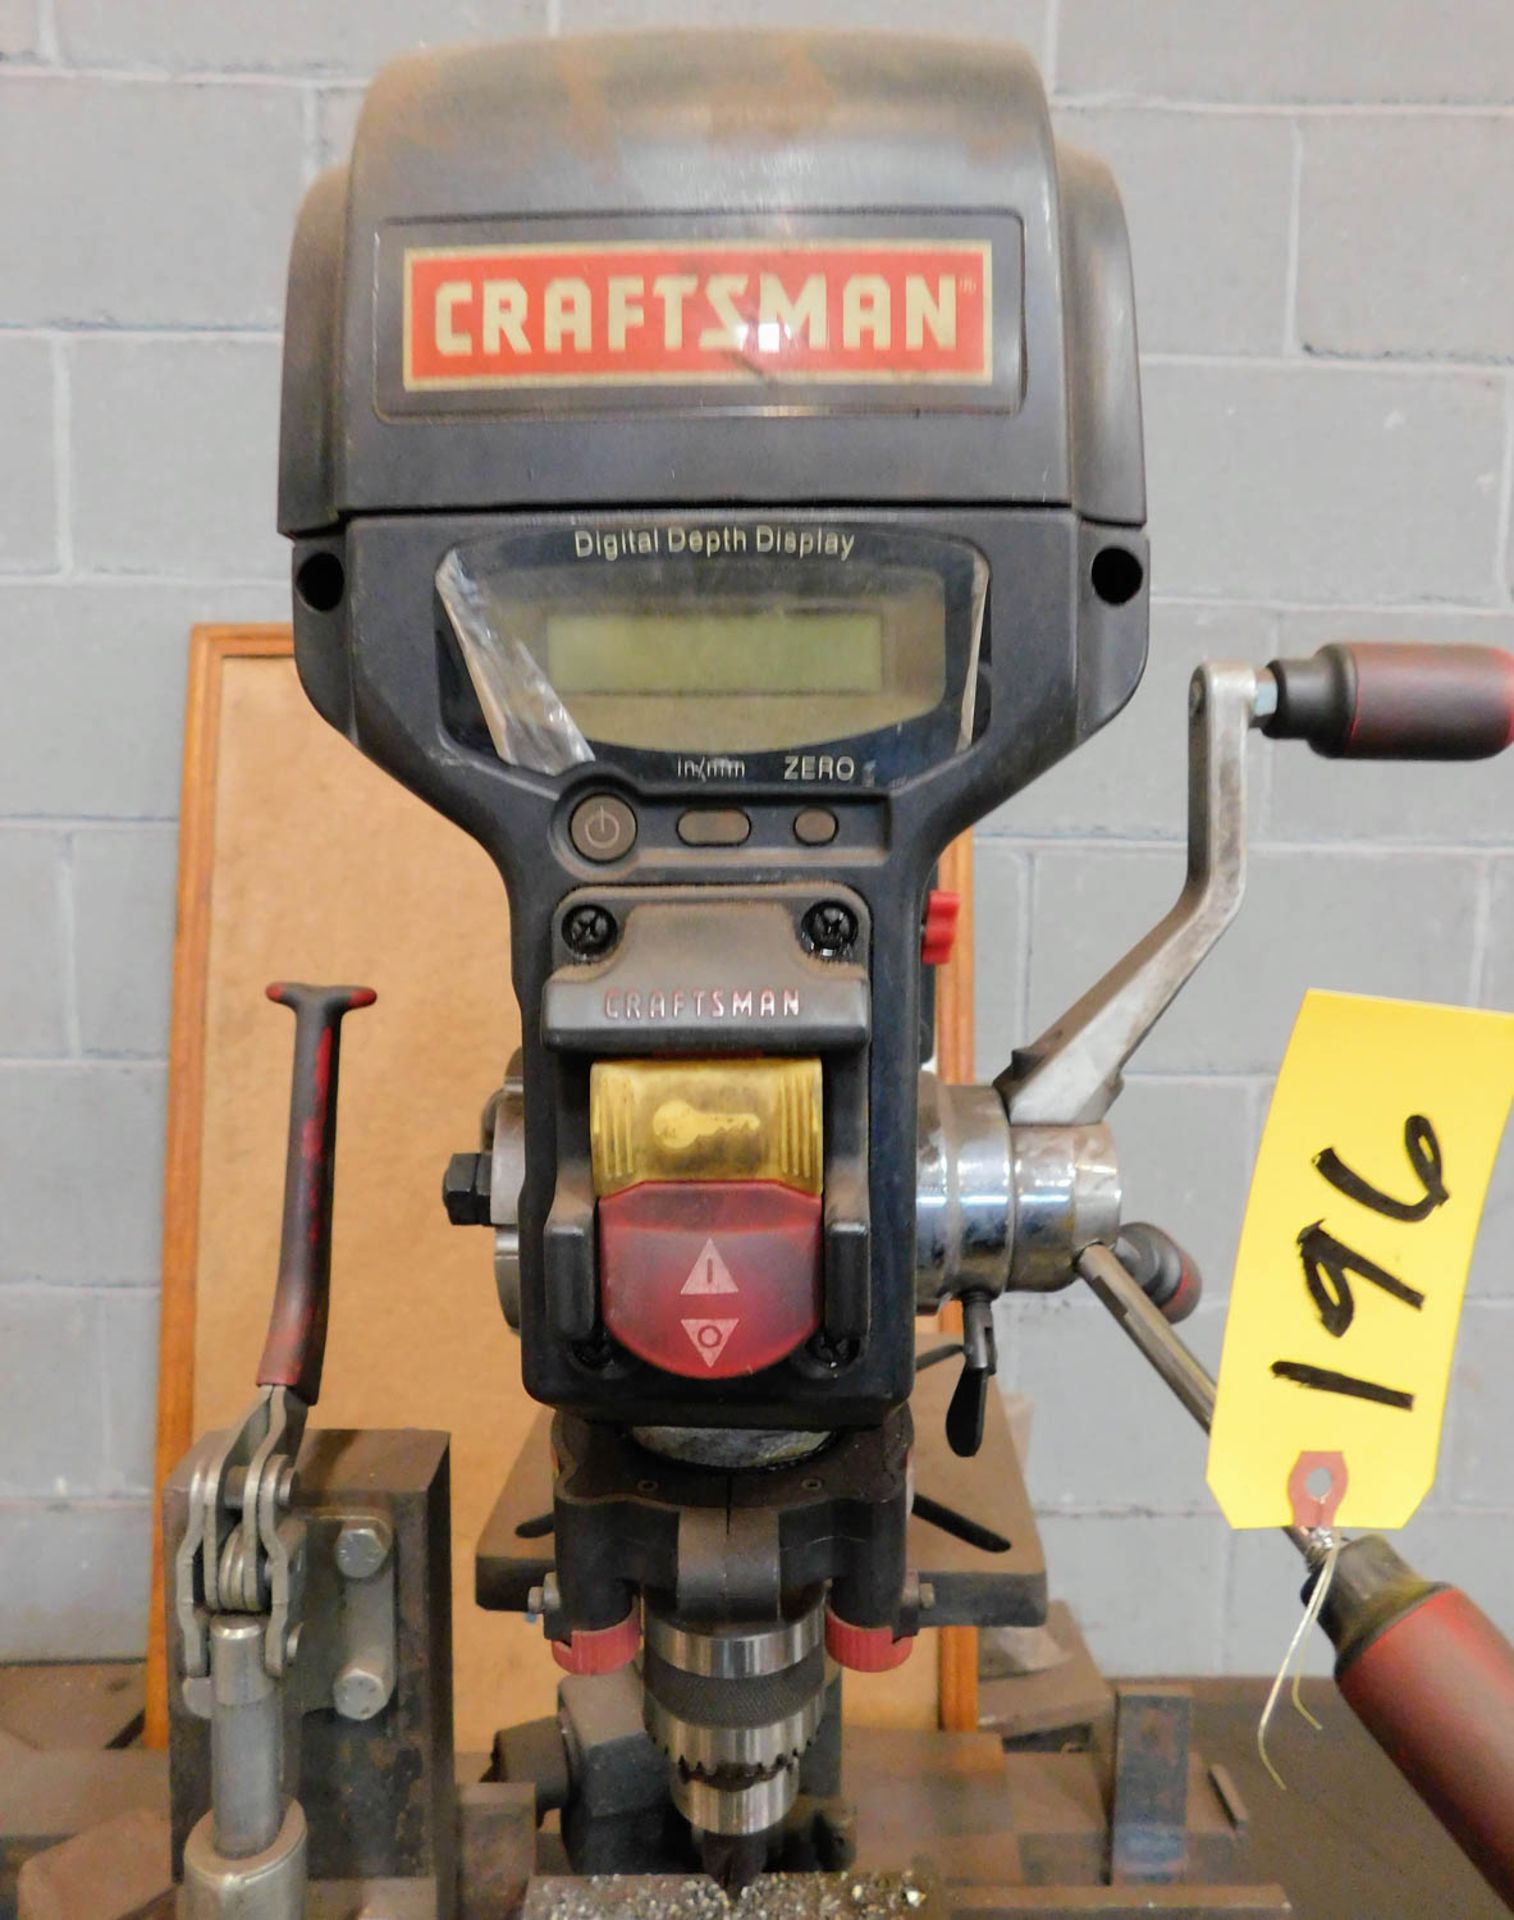 CRAFTSMAN 12" BENCH TOP DRILL PRESS, LASER, 500-3000 RPM, FLEXIBLE WORK LIGHT, S/N: BS093615278 - Image 2 of 2